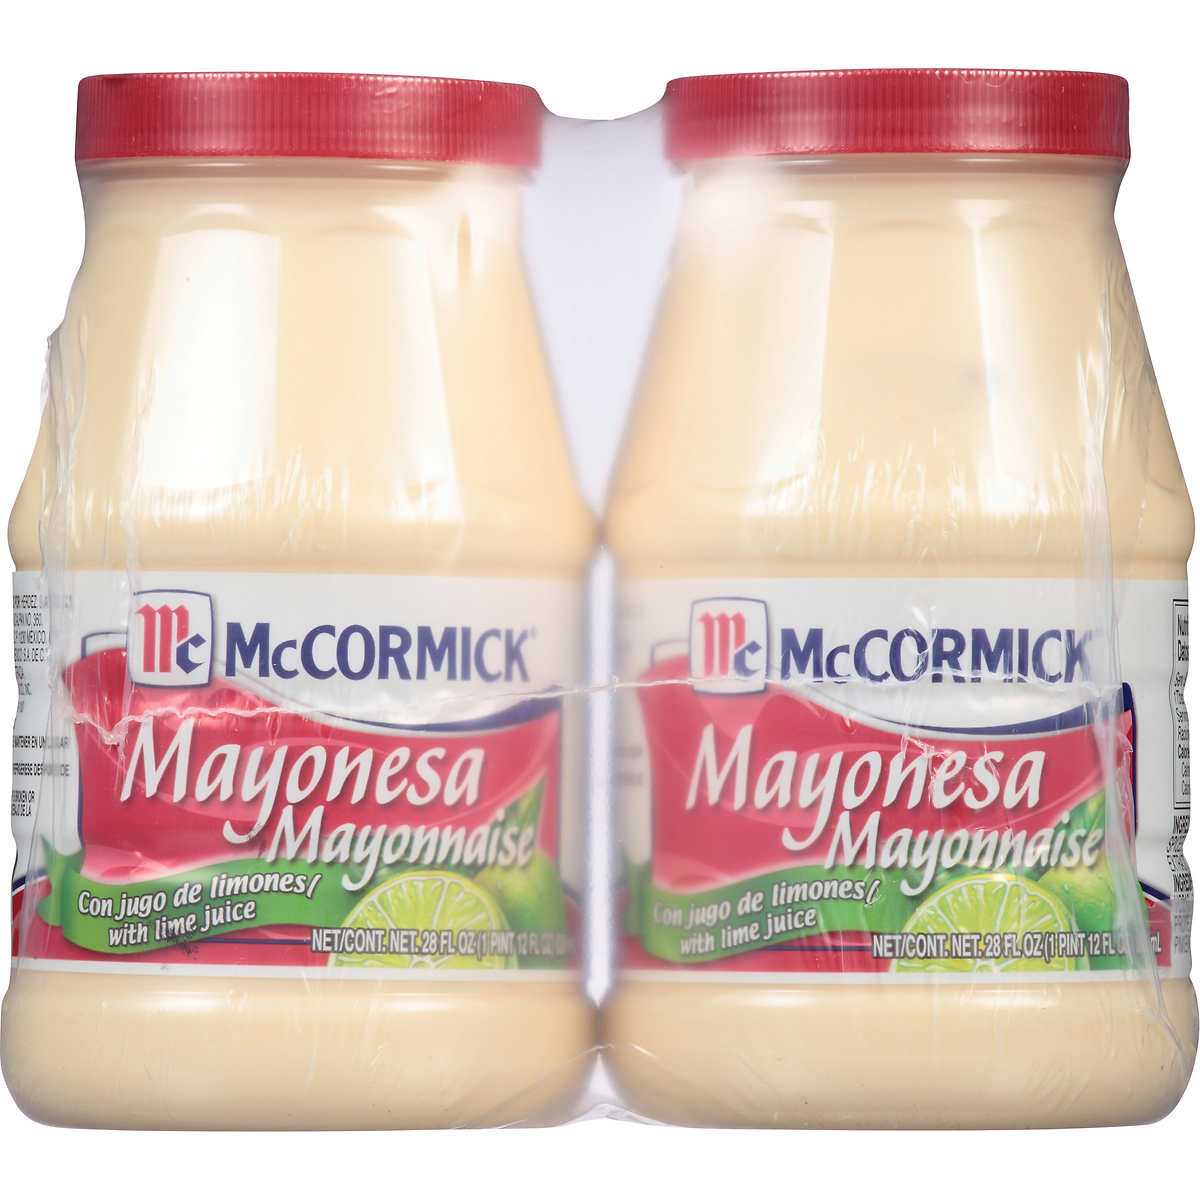 Mayonnaise With Lime Juice - Mccormick